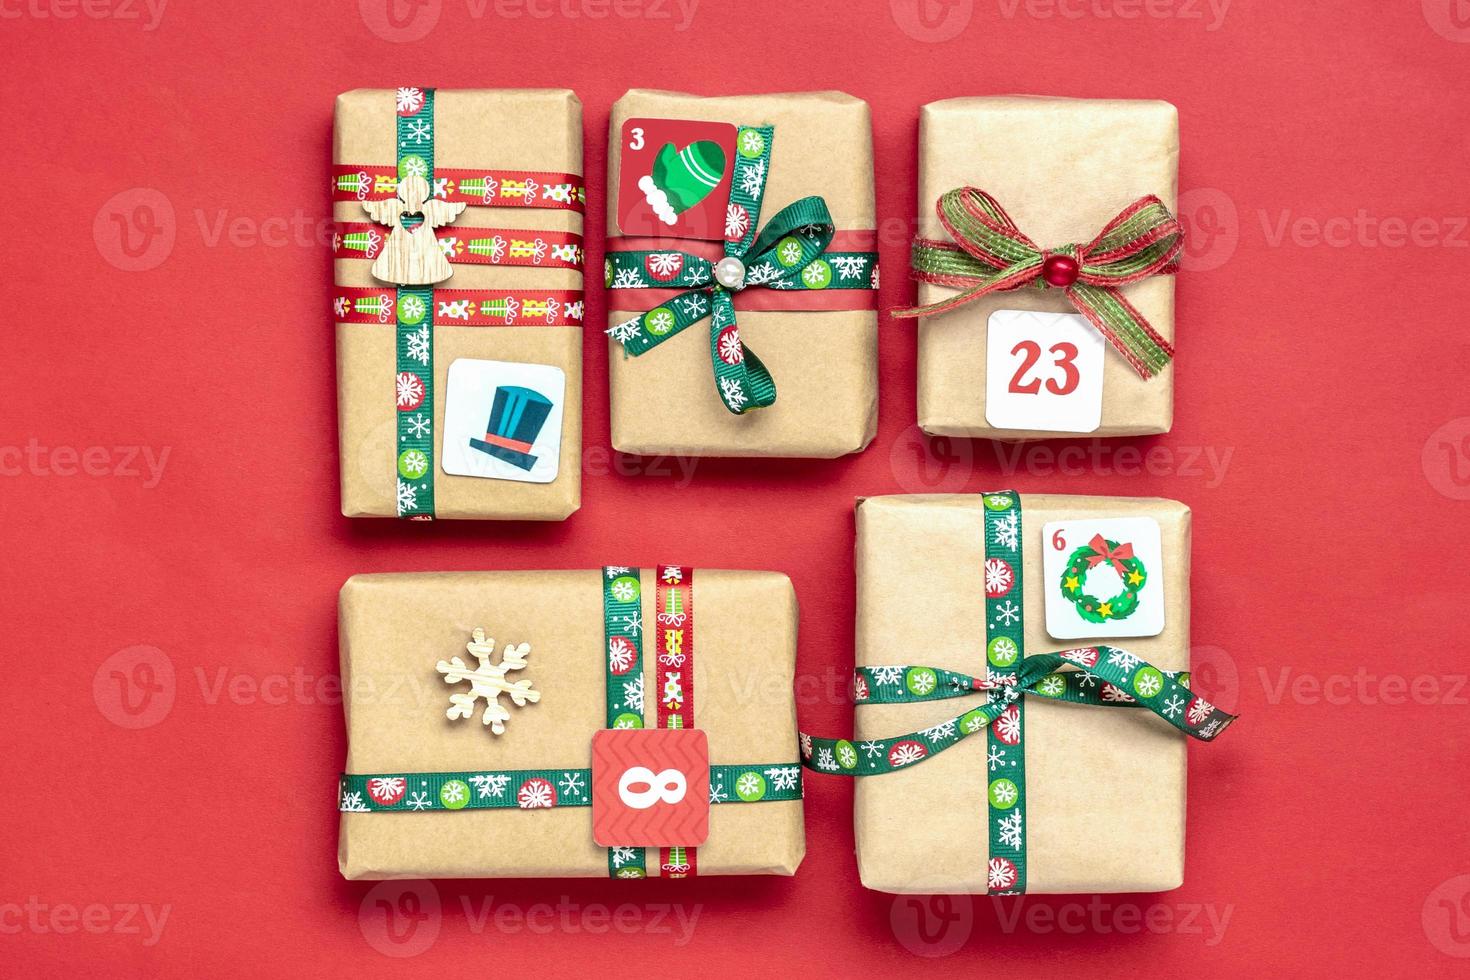 Handmade wrapped red, green gift boxes decorated with ribbons, snowflakes and numbers, Christmas decorations and decor on table Xmas advent calendar concept Top view Flat lay Holiday card Banner photo